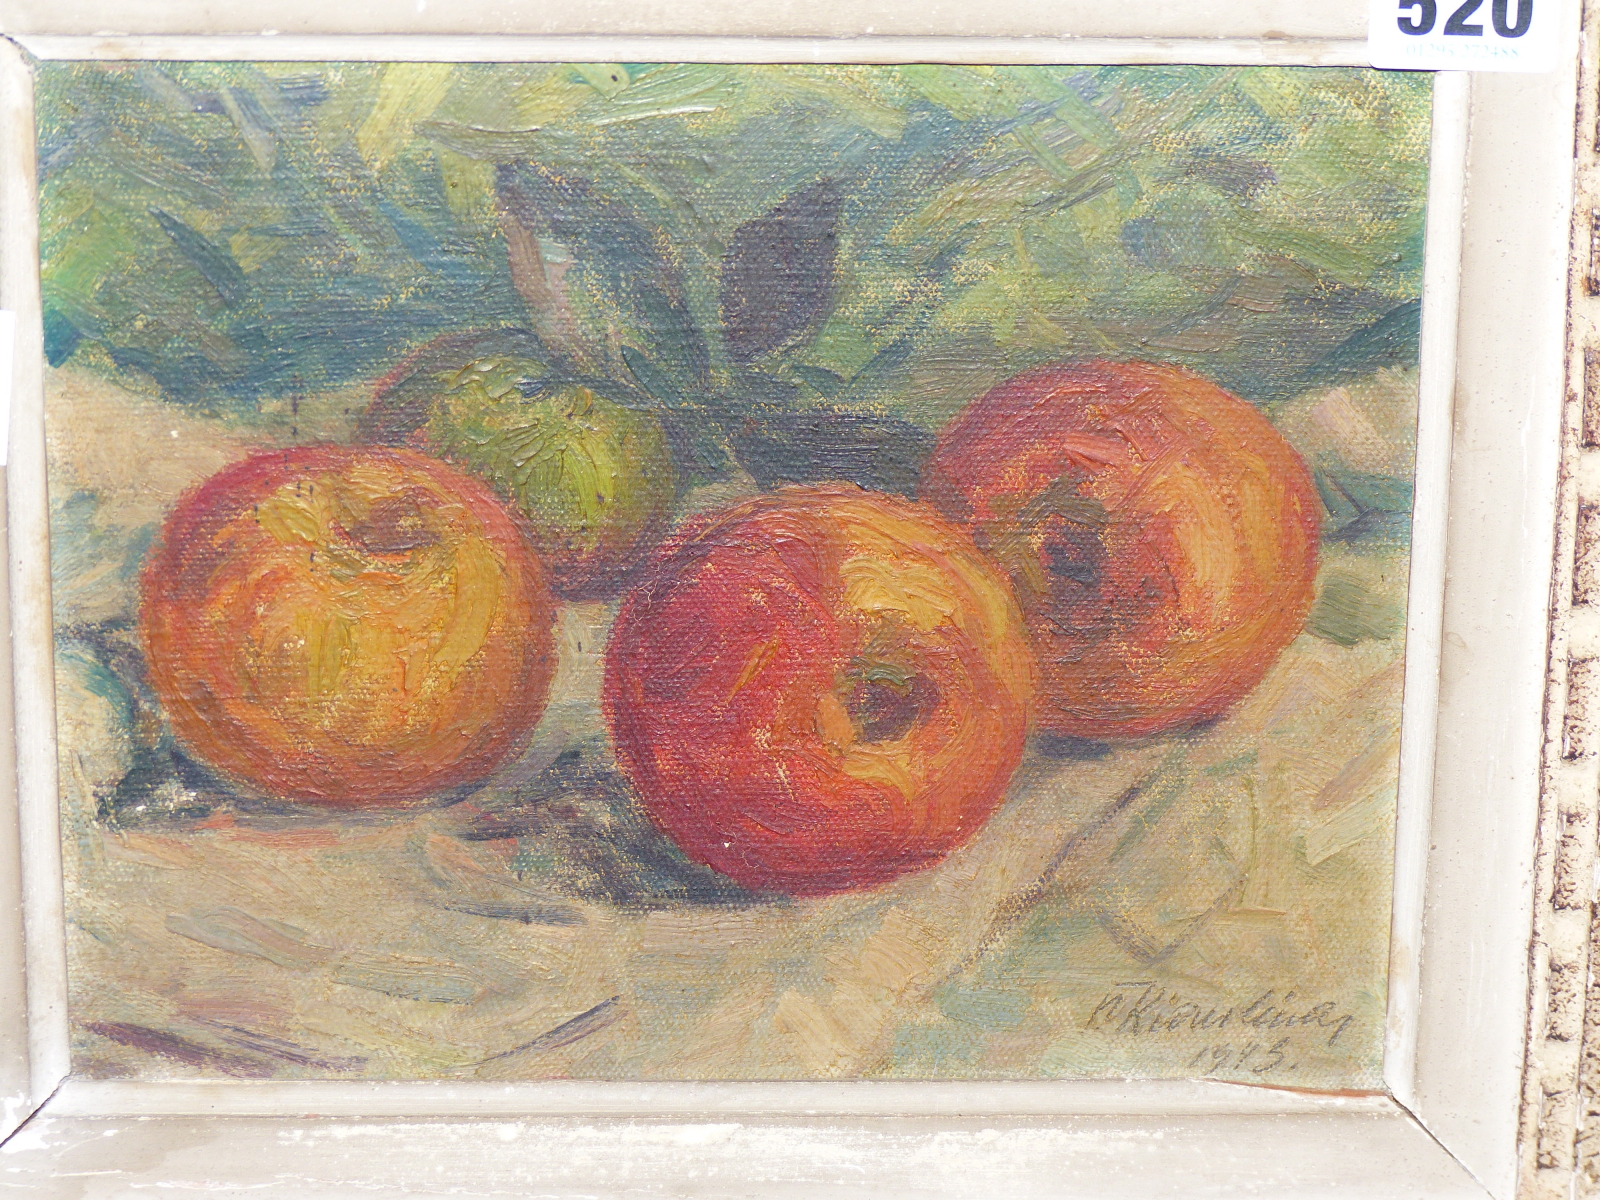 CONTINENTAL SCHOOL (20TH CENTURY), STILL LIFE OF APPLES, INDISTINCTLY SIGNED AND DATED 1943, OIL